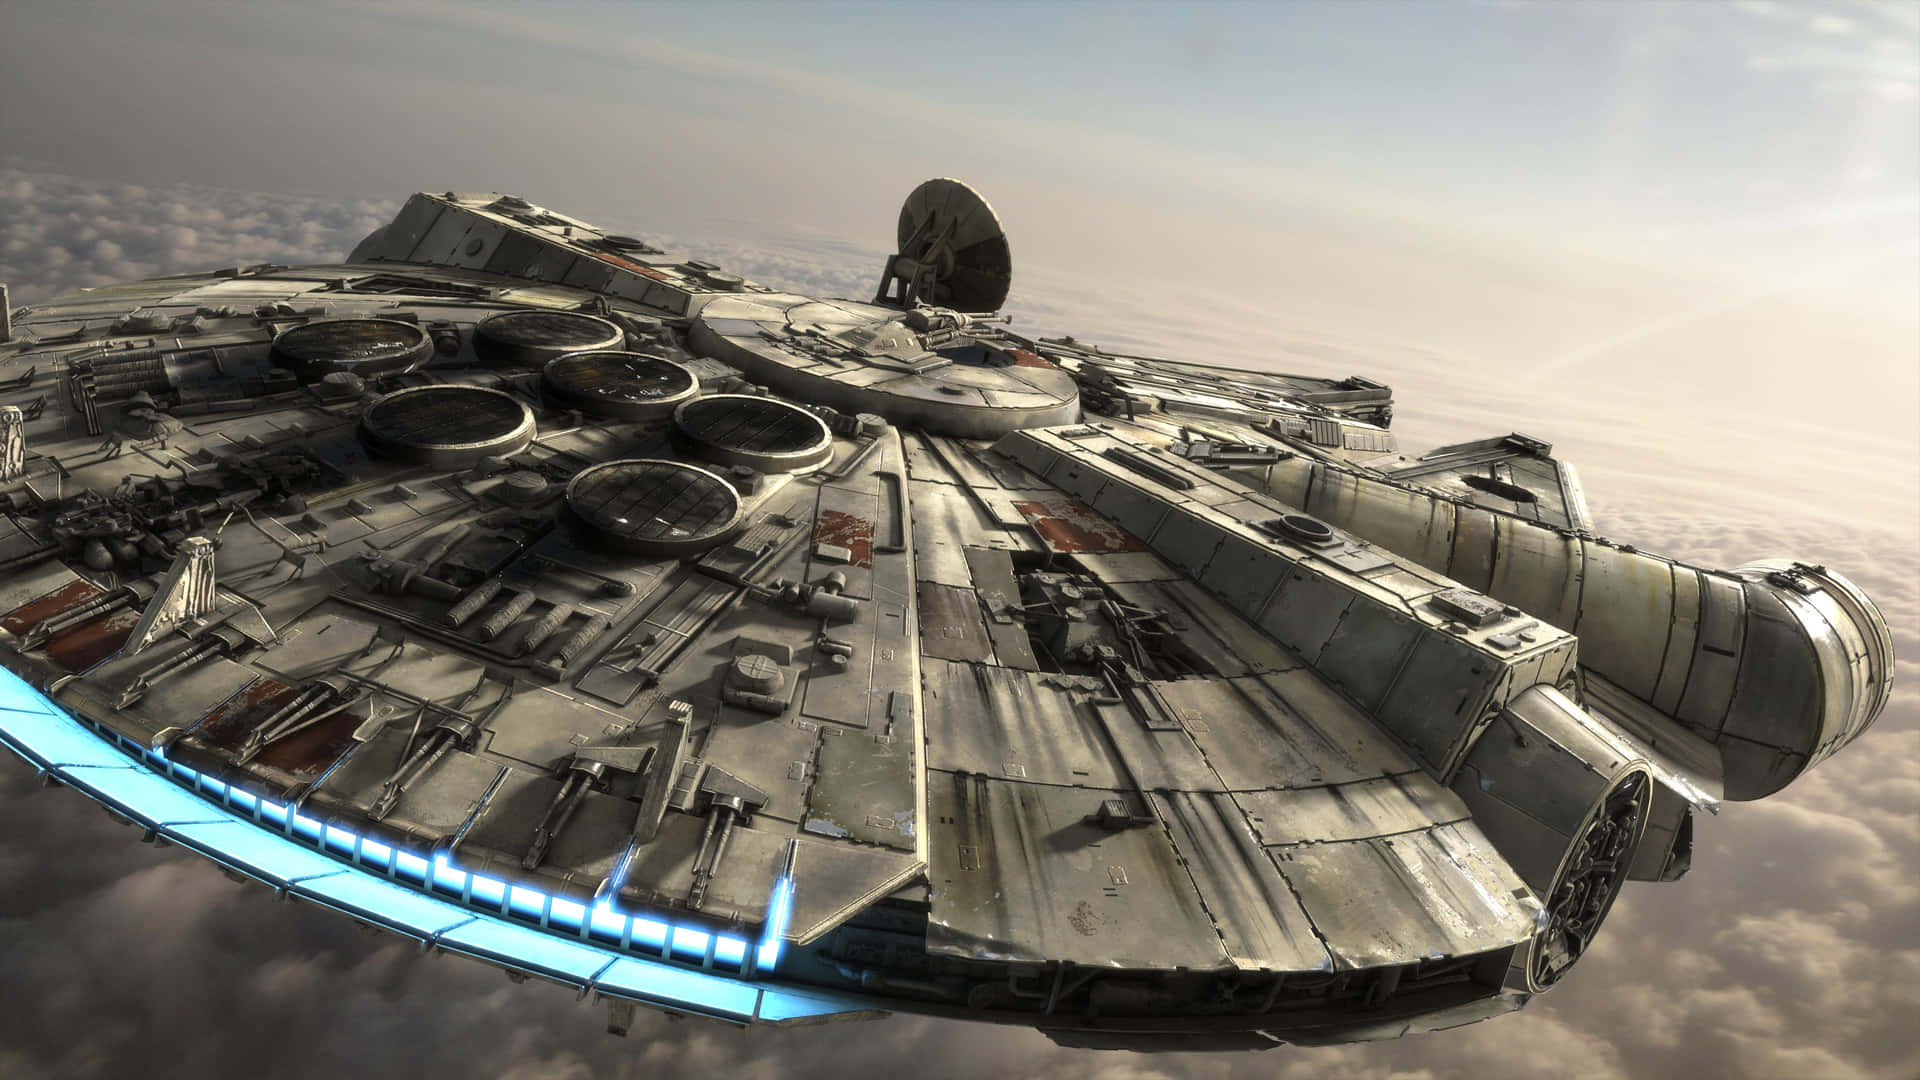 "Fly through the galaxy in the iconic Millennium Falcon" Wallpaper